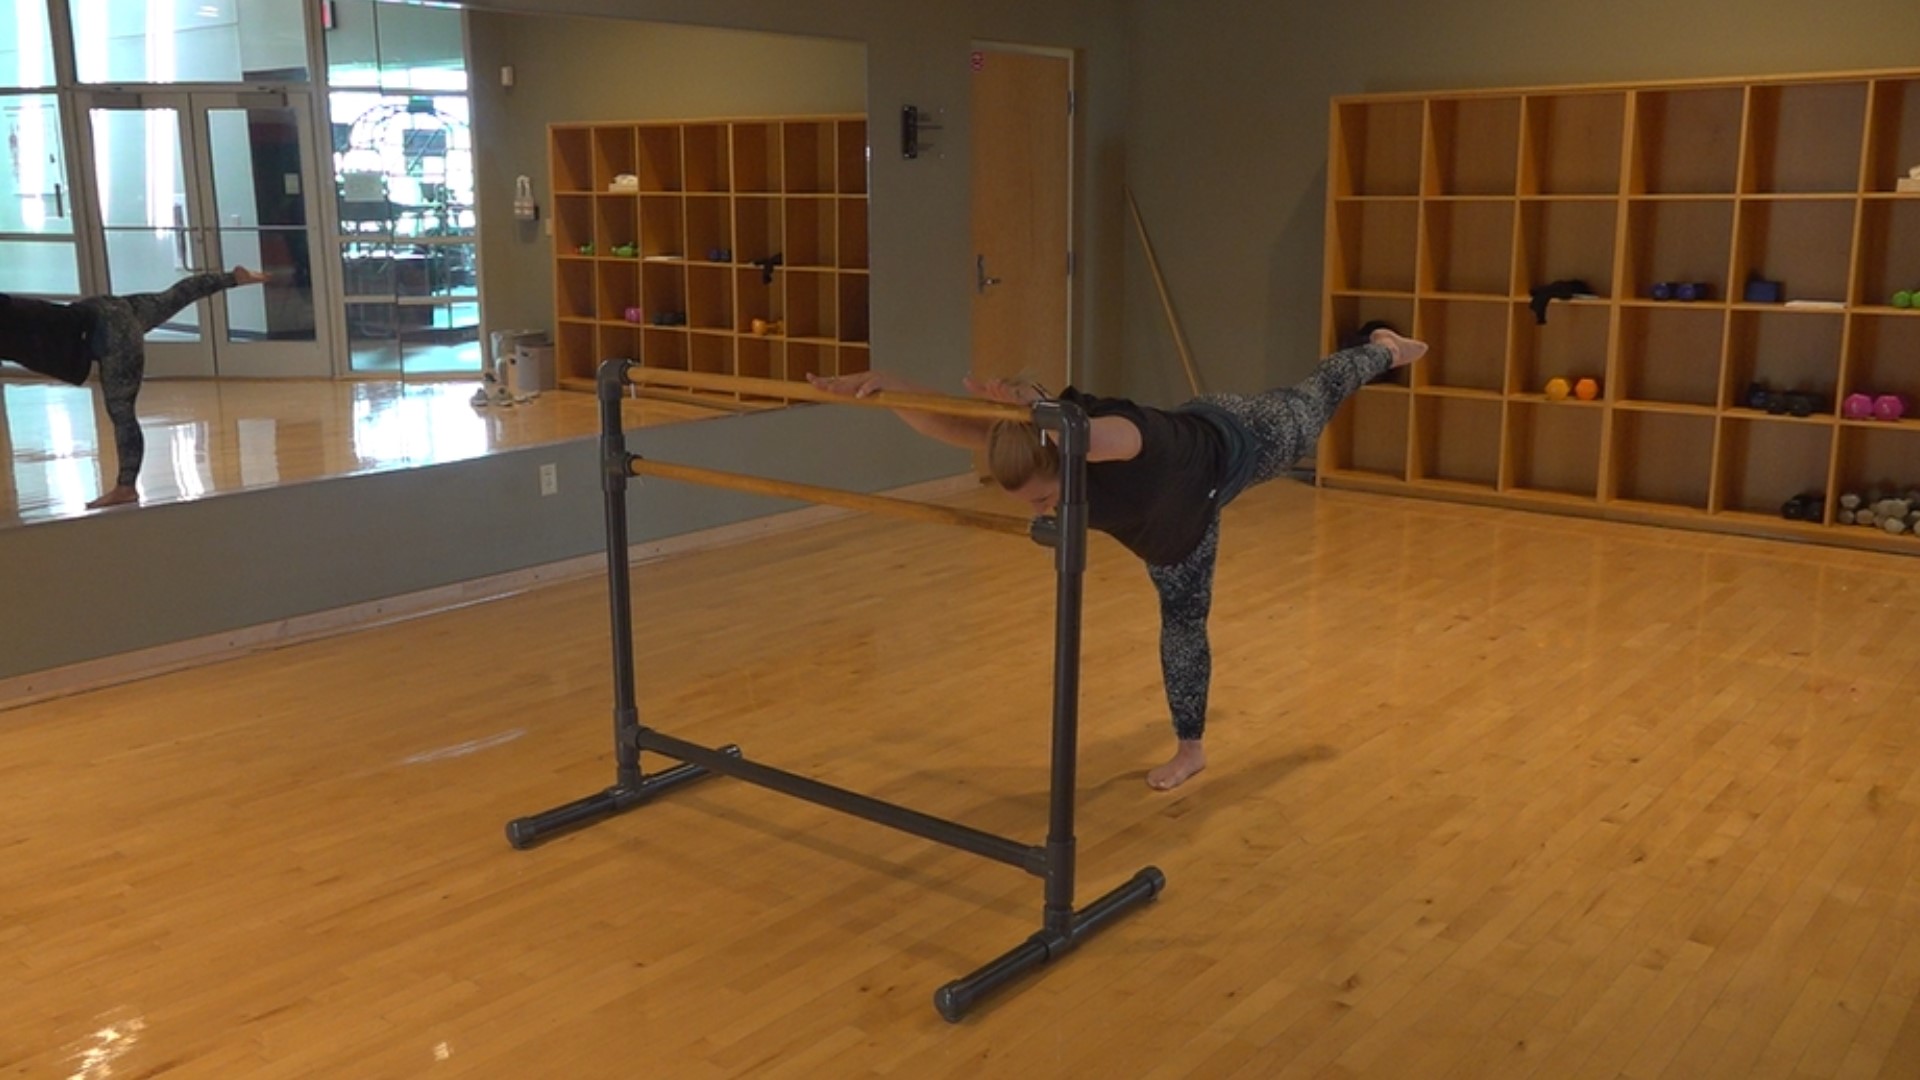 Little movements experienced during a barre class can really cause a good burn! We try a few out in this week's FOX43 FitMinute, take a look.